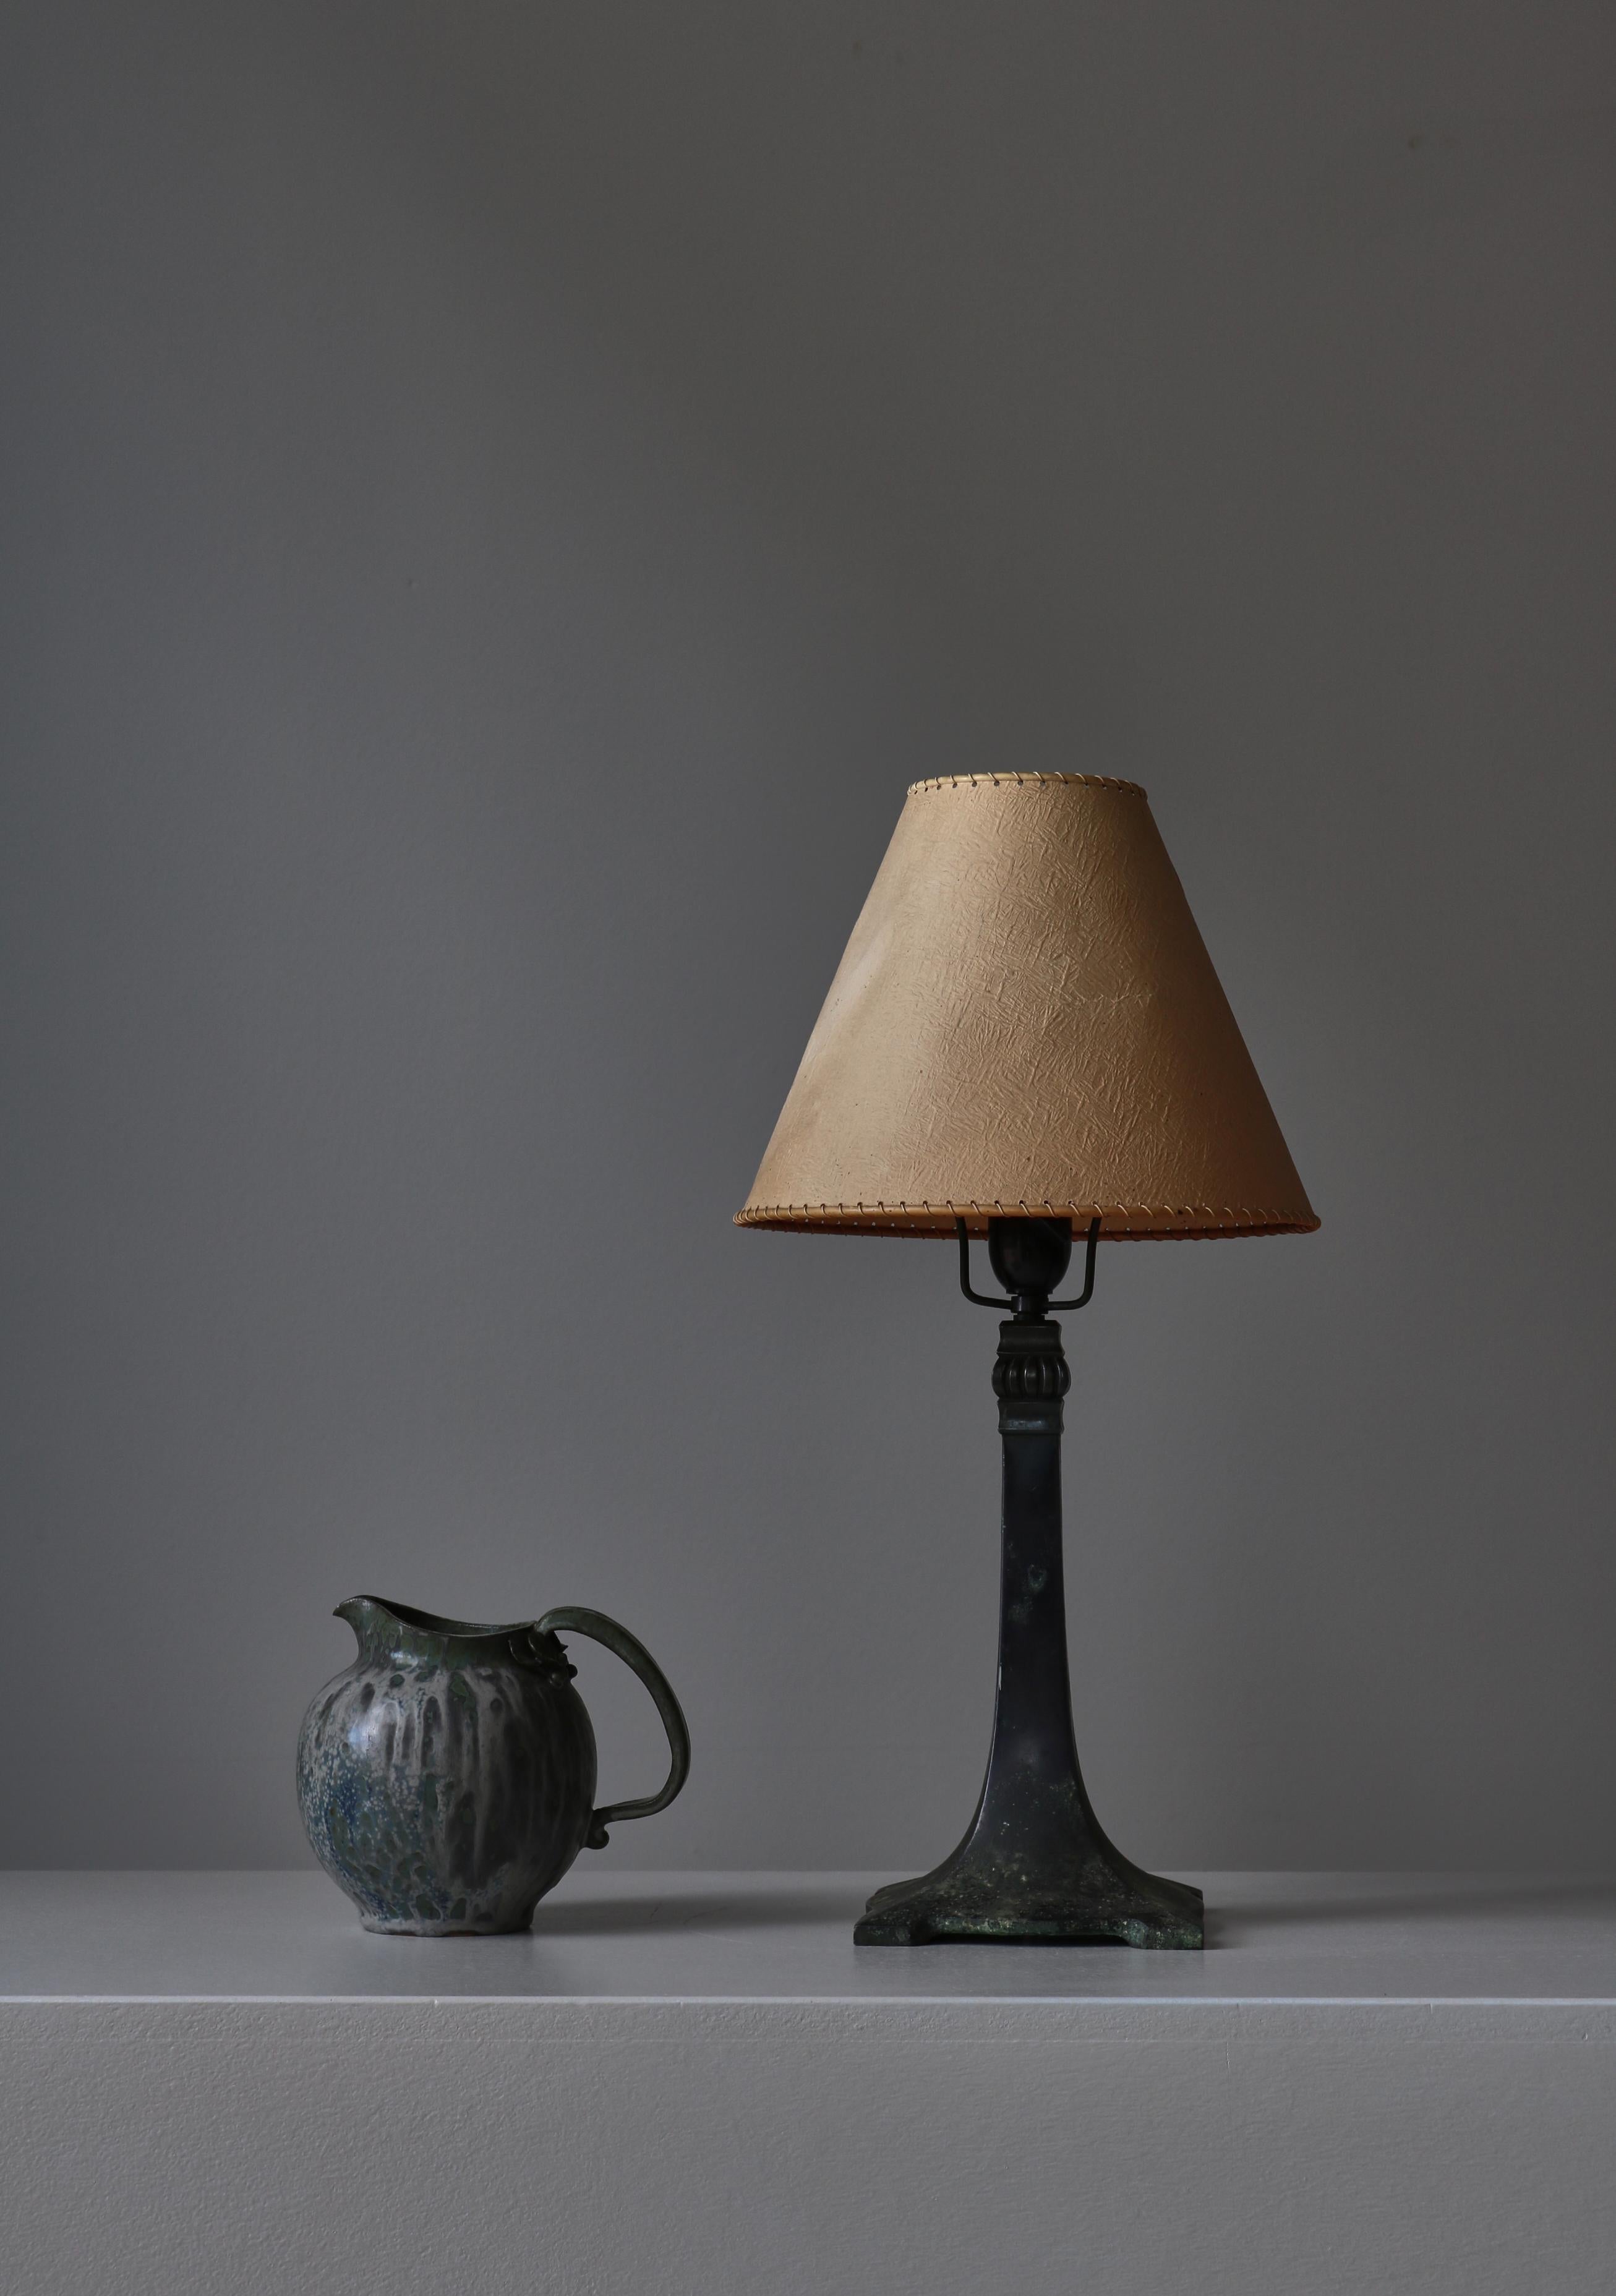 Beautiful Art Deco table lamp in patinated solid bronze. Made in Denmark in the 1920s. Great quality and wear. In the style of Just Andersen. Equipped with old shade that may not be original.